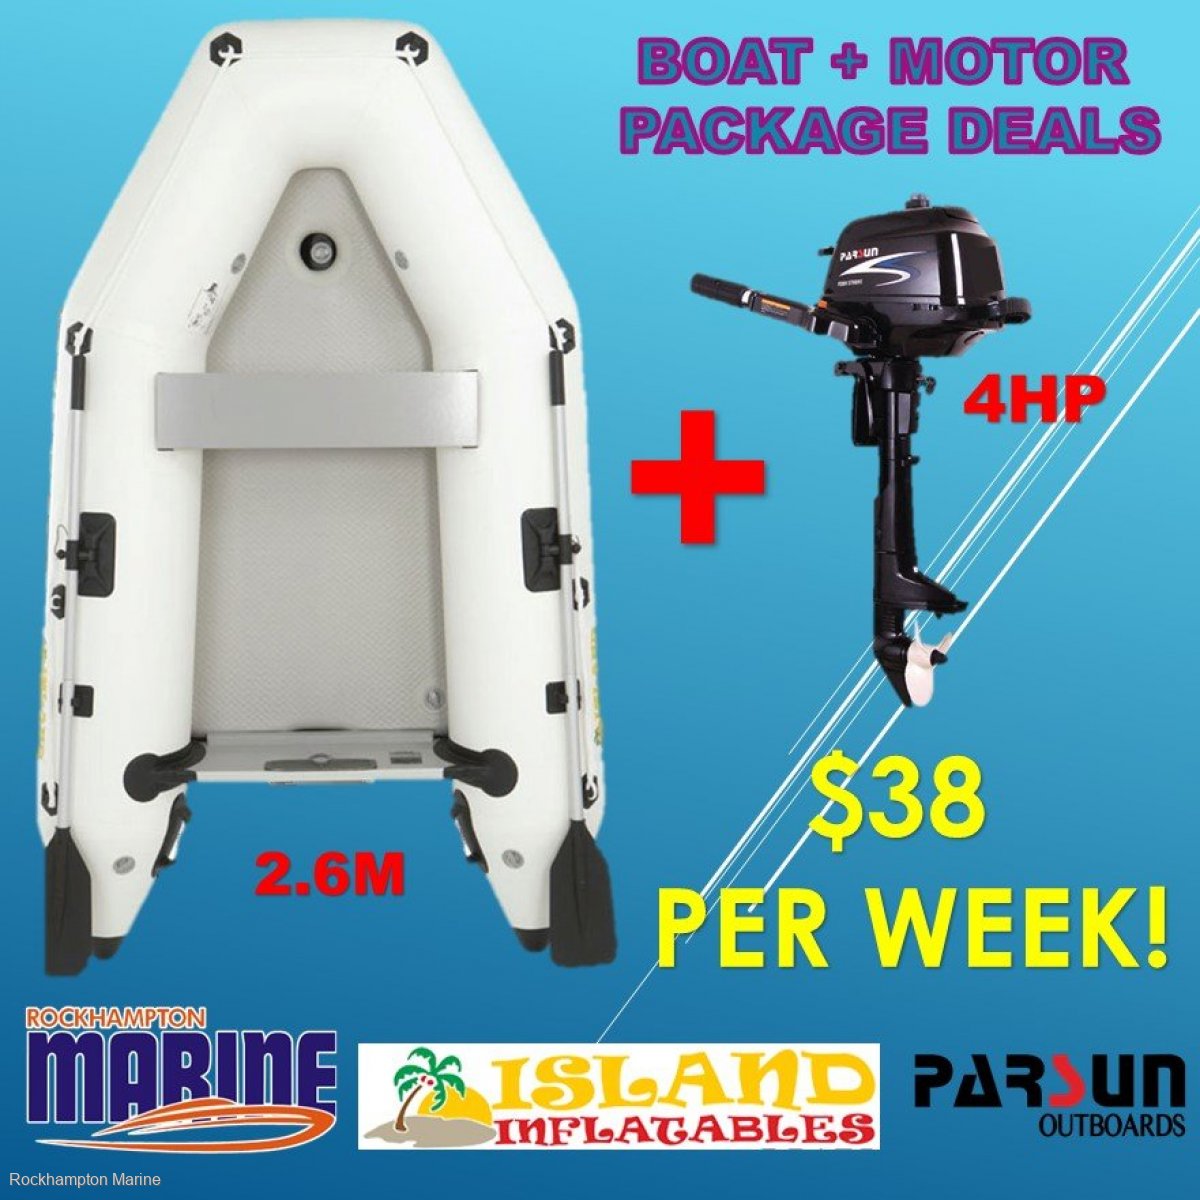 New Island Inflatables Island Airdeck 260 Boat + Parsun 4hp Four Stroke Outboard Package